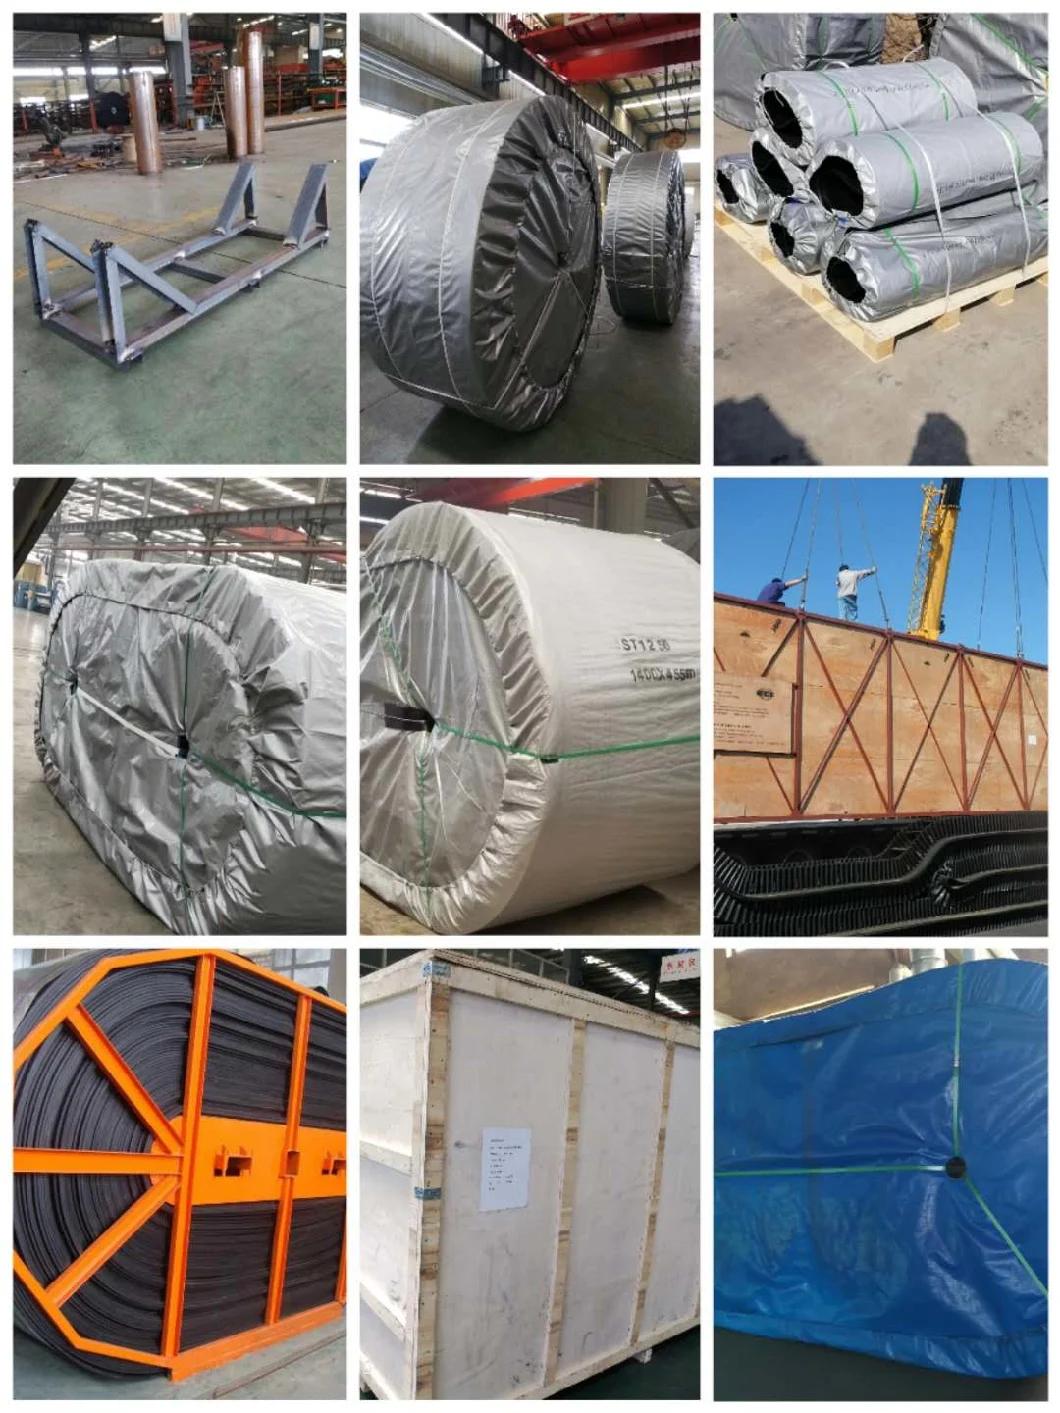 Corrugated Sidewall Cleated Rubber Conveyor Belt for Steep Inclination Angle Materials Conveying